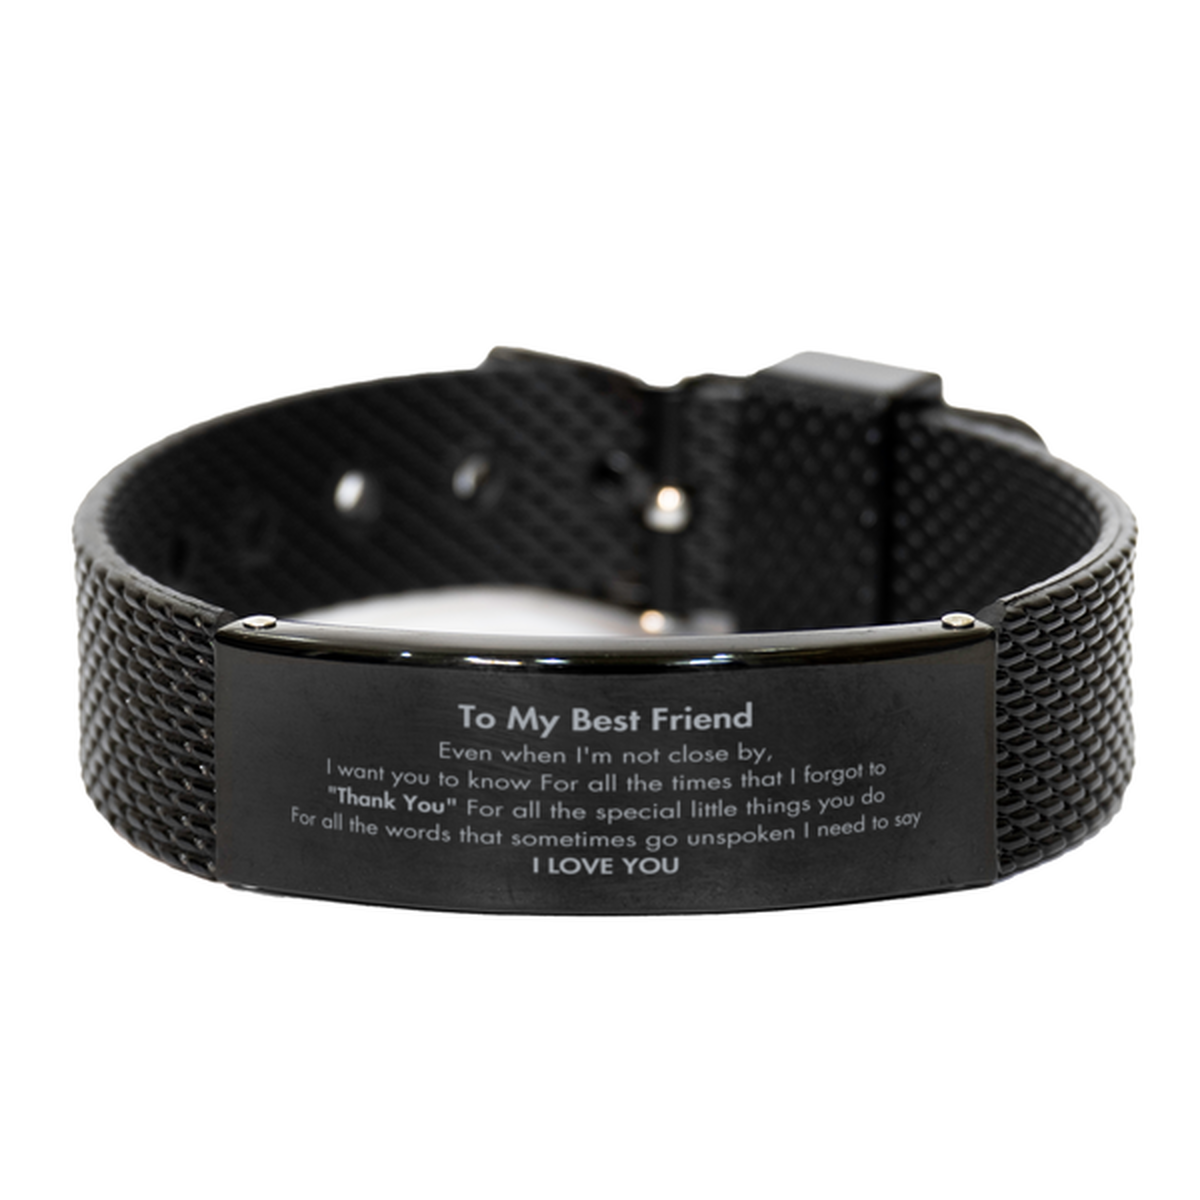 Thank You Gifts for Best Friend, Keepsake Black Shark Mesh Bracelet Gifts for Best Friend Birthday Mother's day Father's Day Best Friend For all the words That sometimes go unspoken I need to say I LOVE YOU